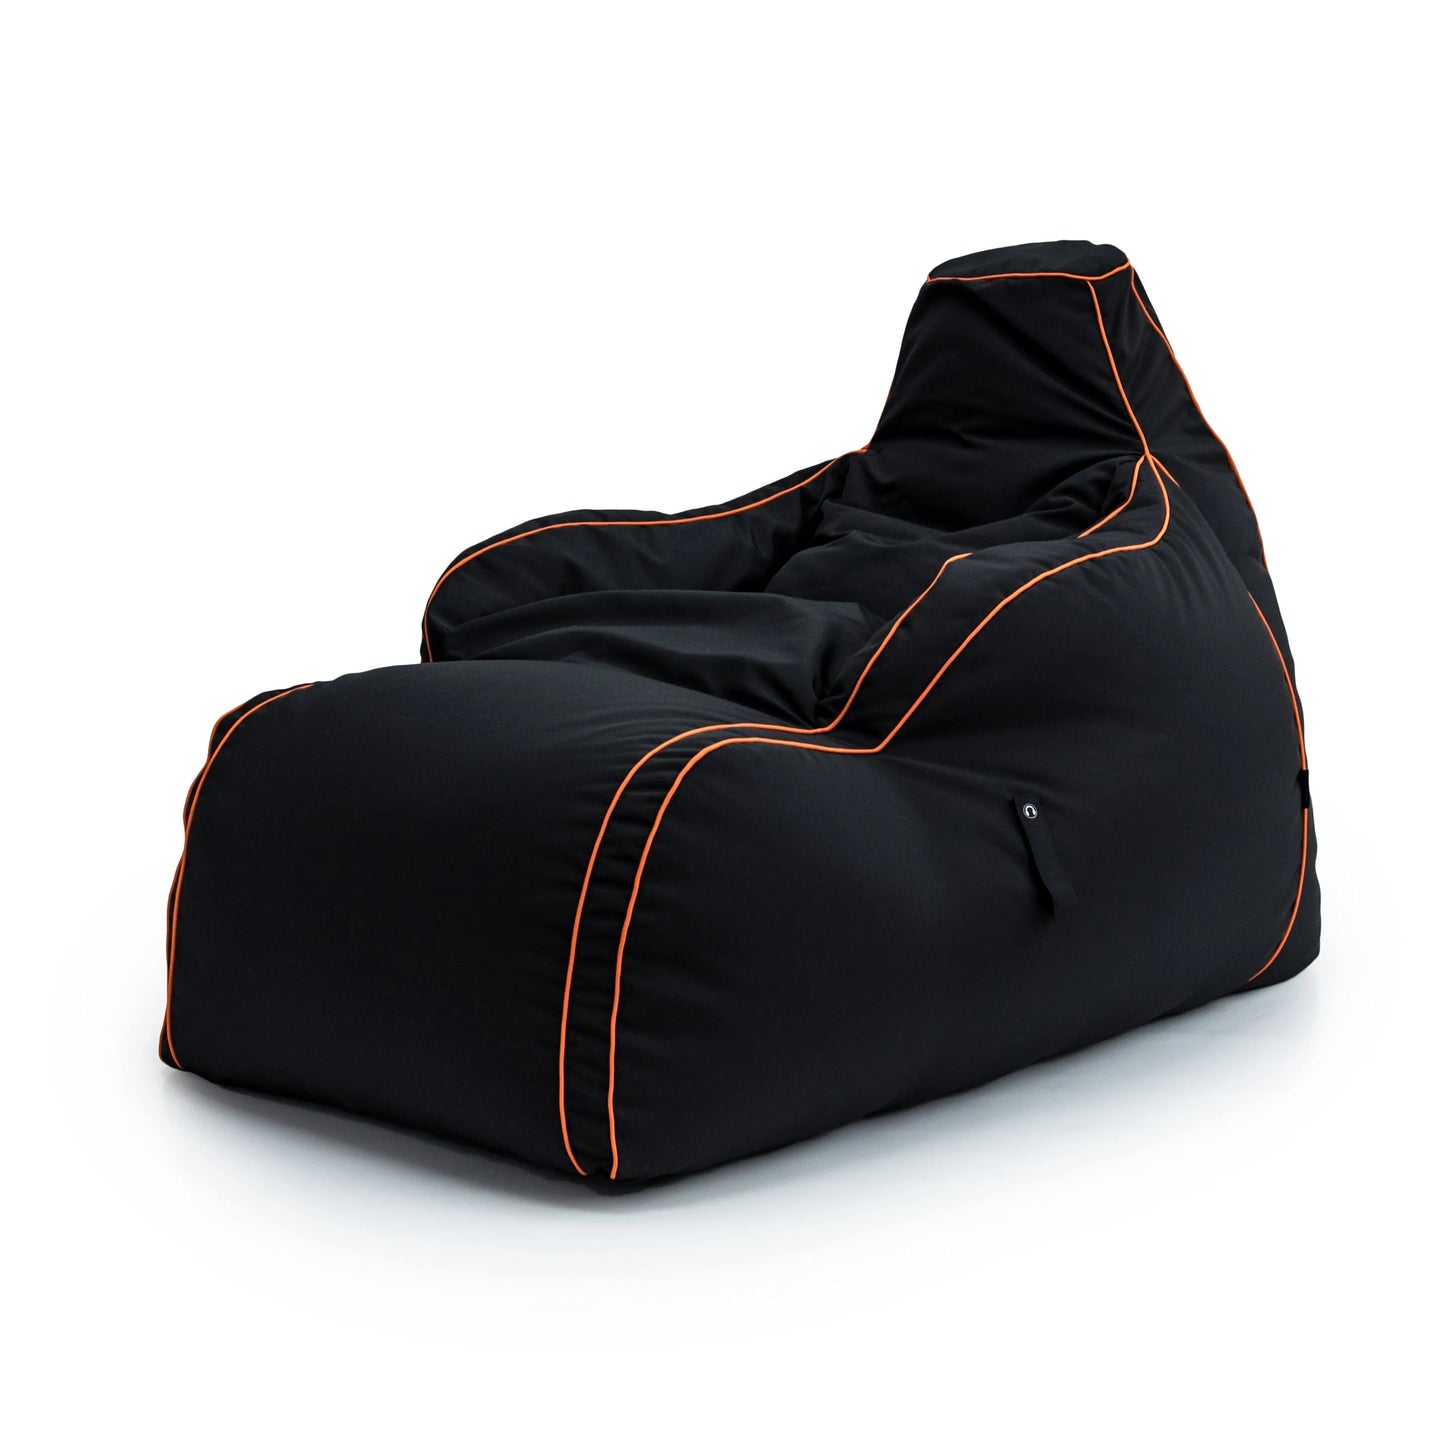 A black bean bag chair with orange trim sits on a white background.